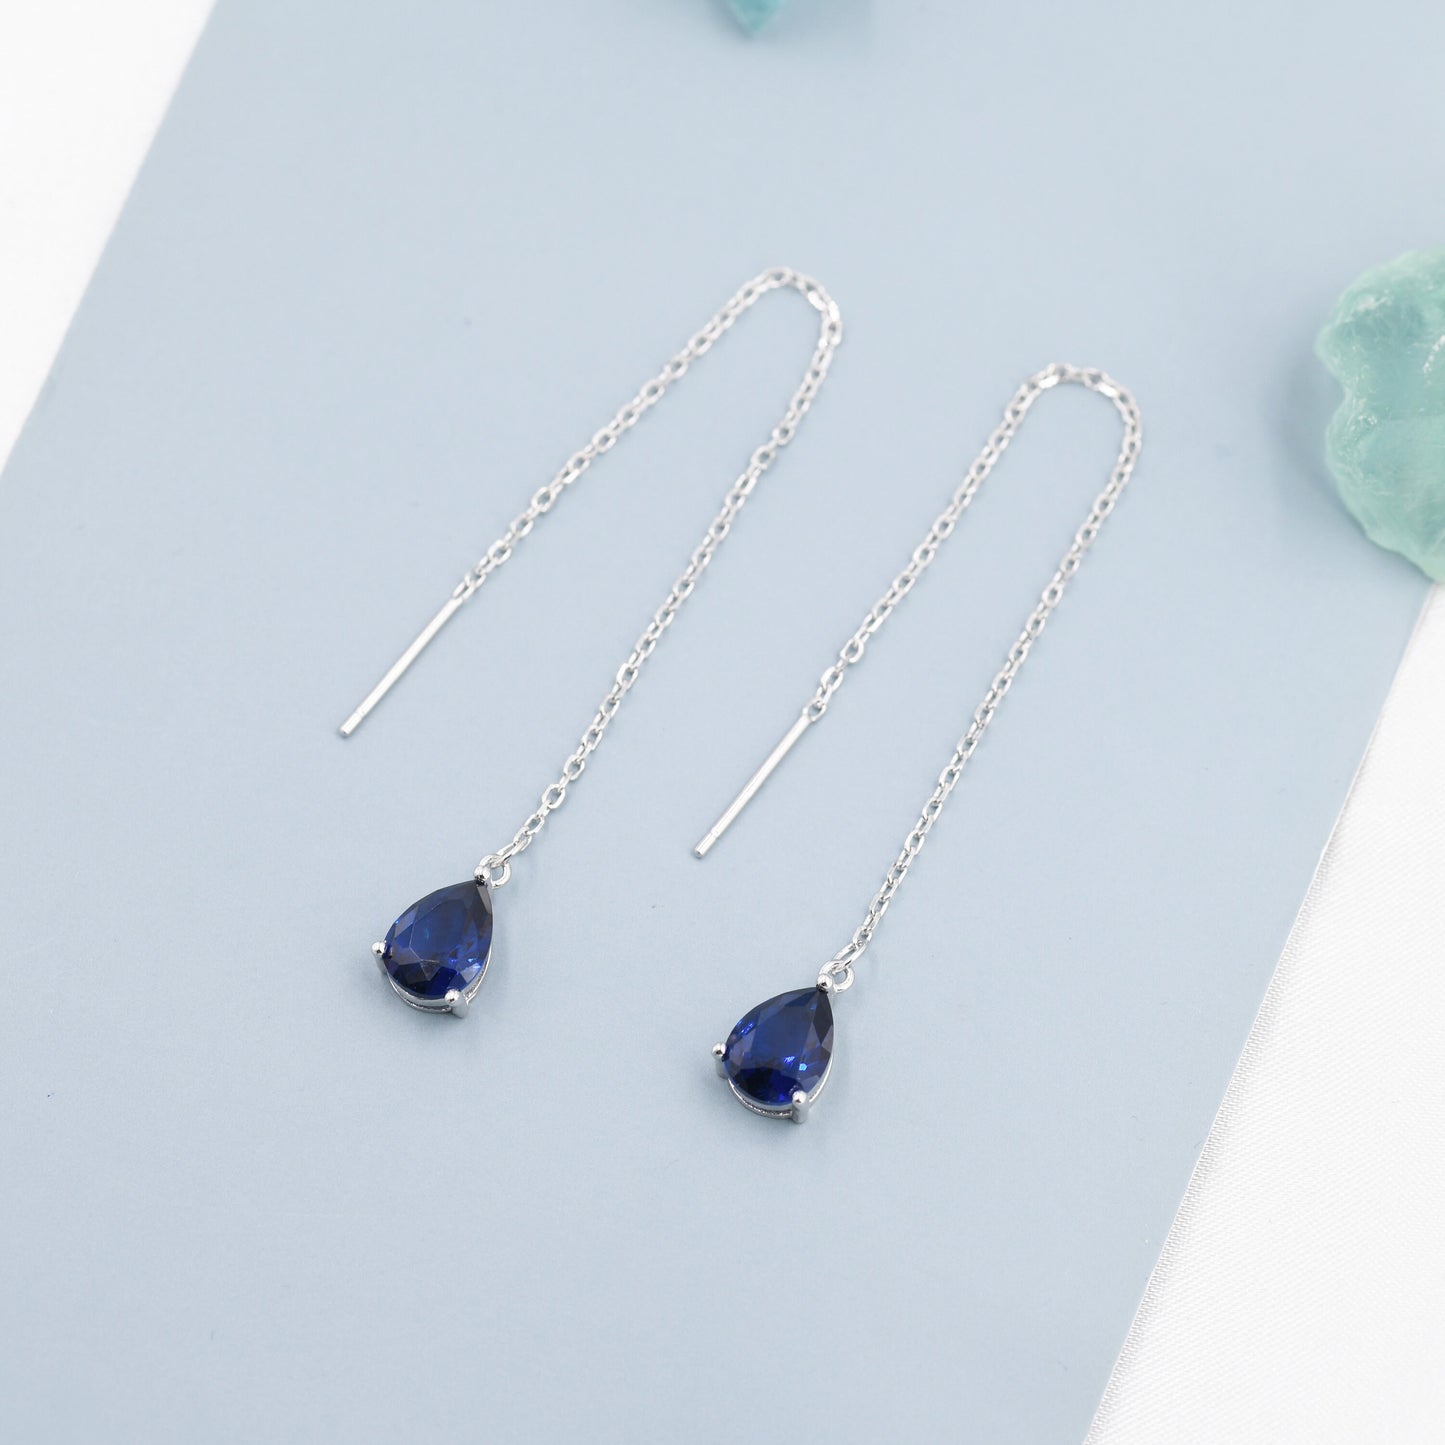 Sapphire Blue CZ Droplet Threader Earrings in Sterling Silver, Silver or Gold,  Pear Cut CZ Long Ear Threaders, Sparkly CZ Threaders